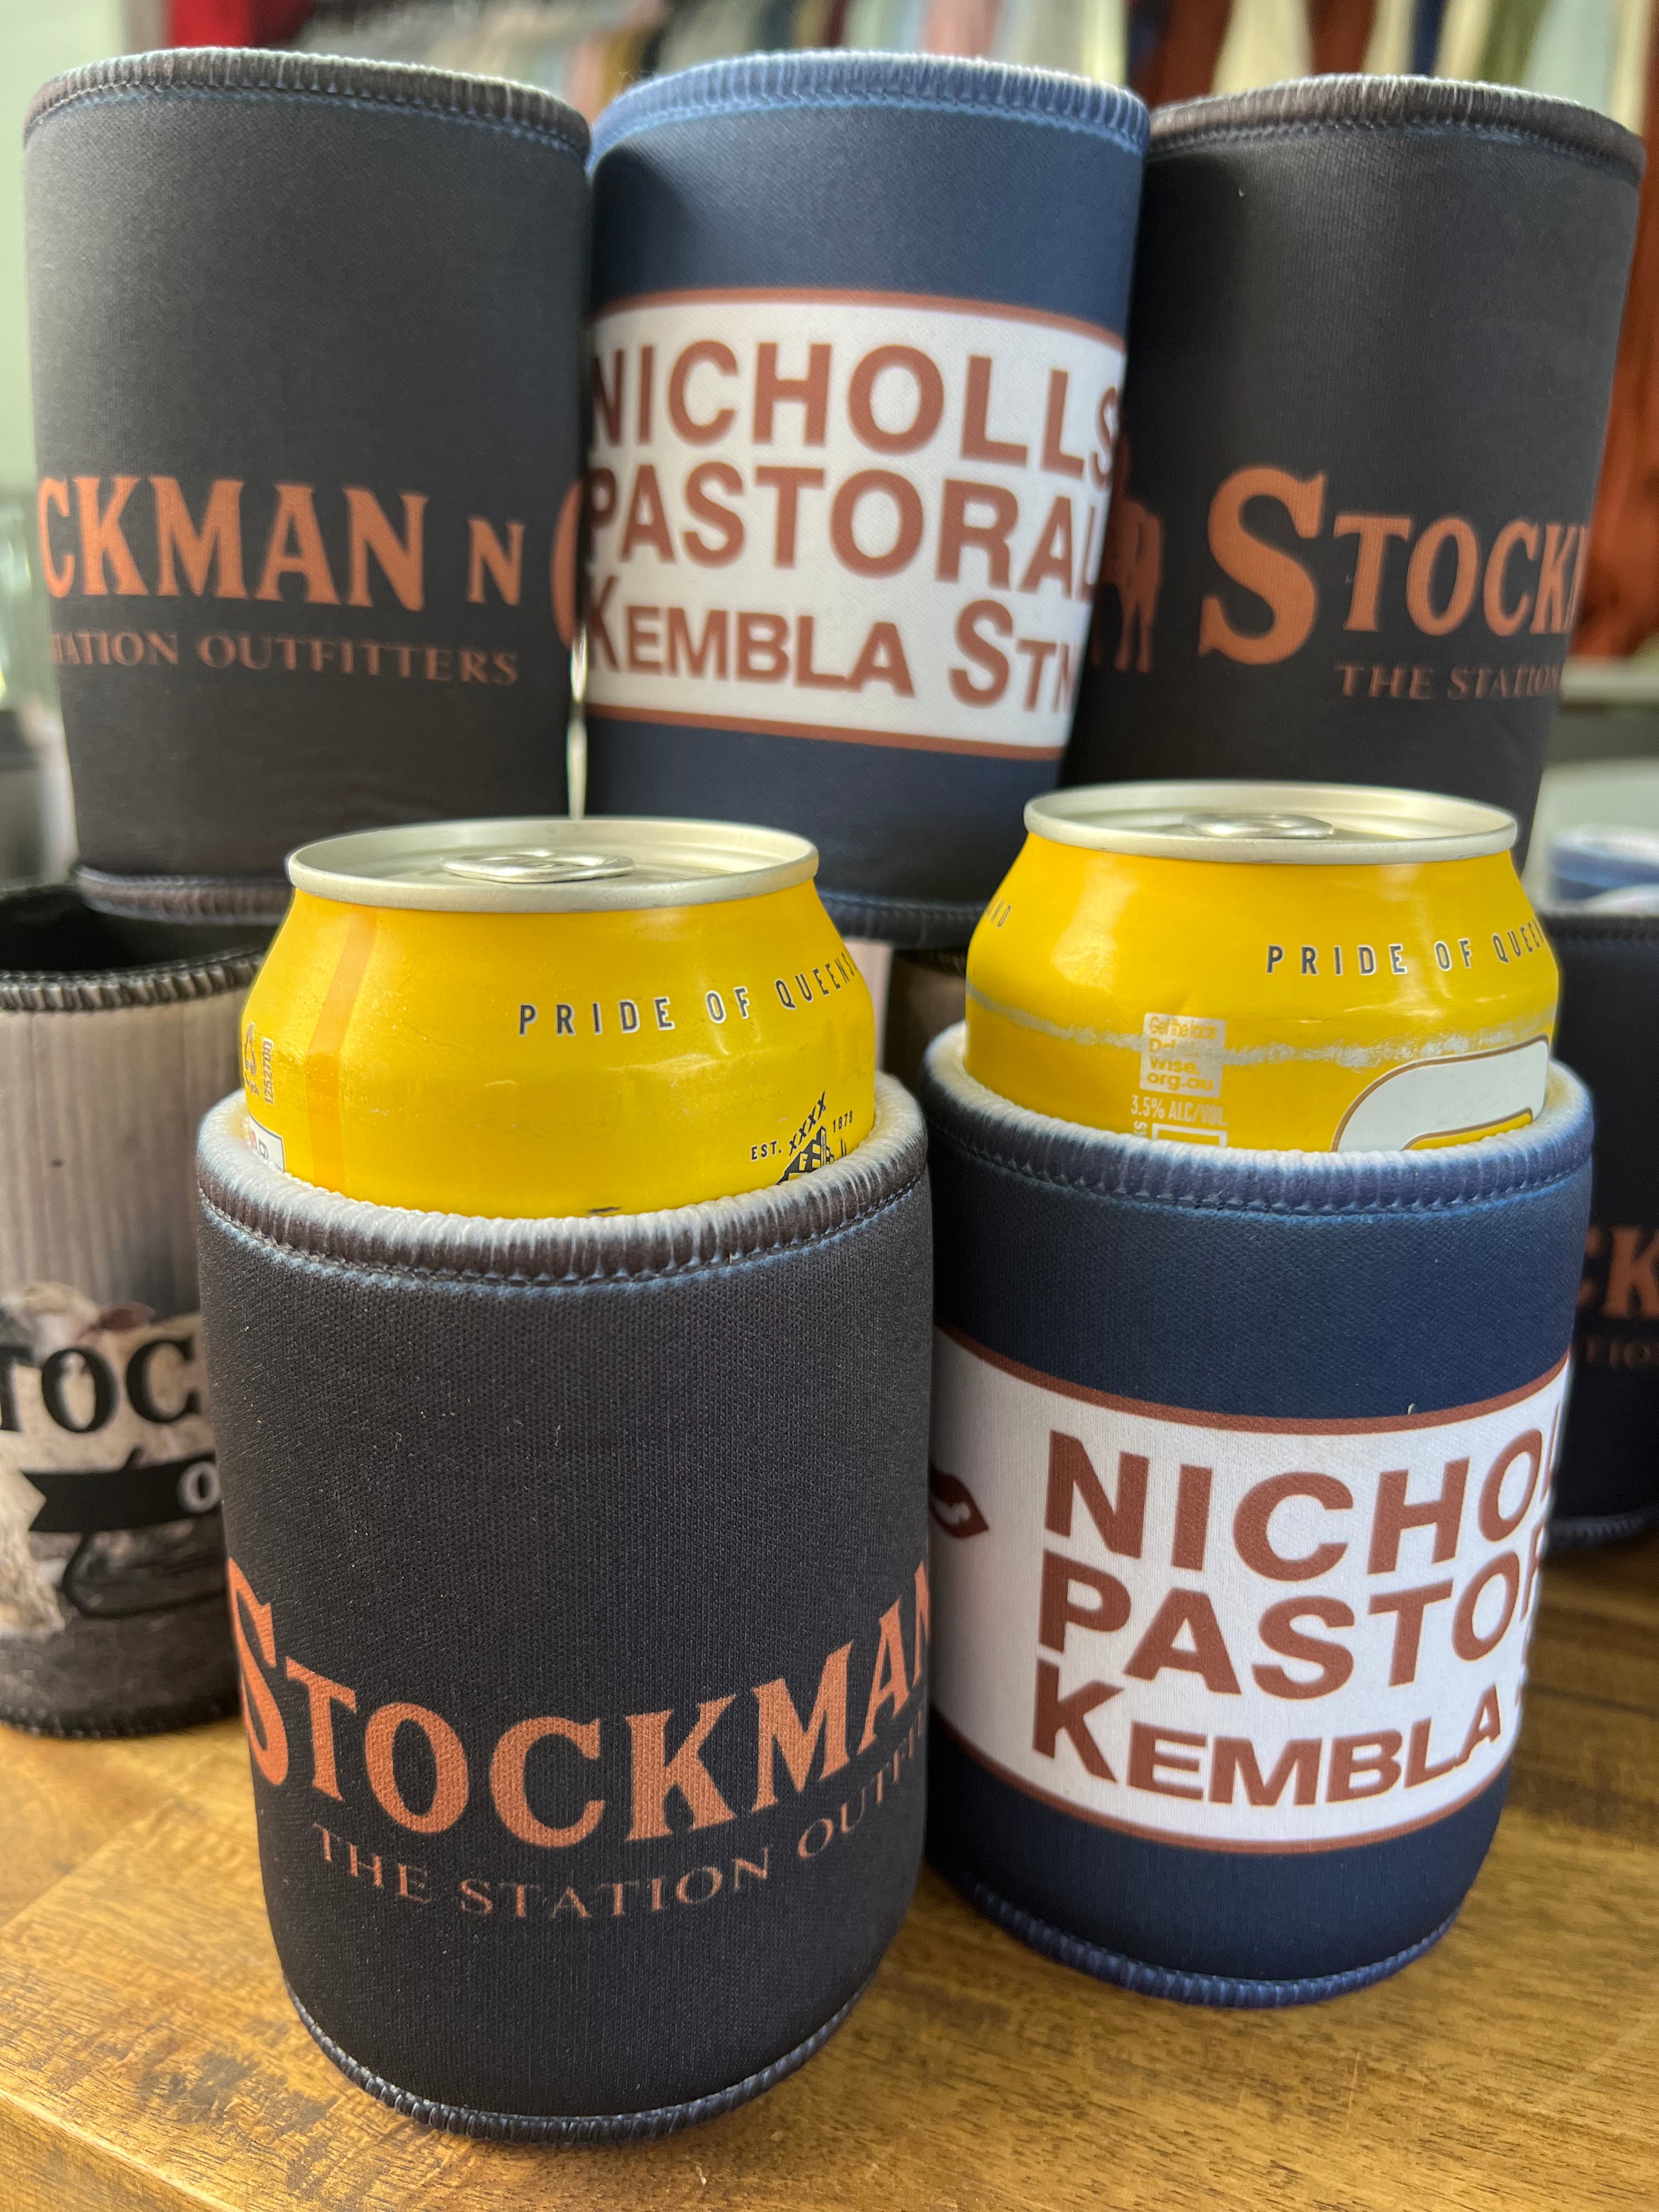 Stockman Stubby cooler - STOCKMAN N CO